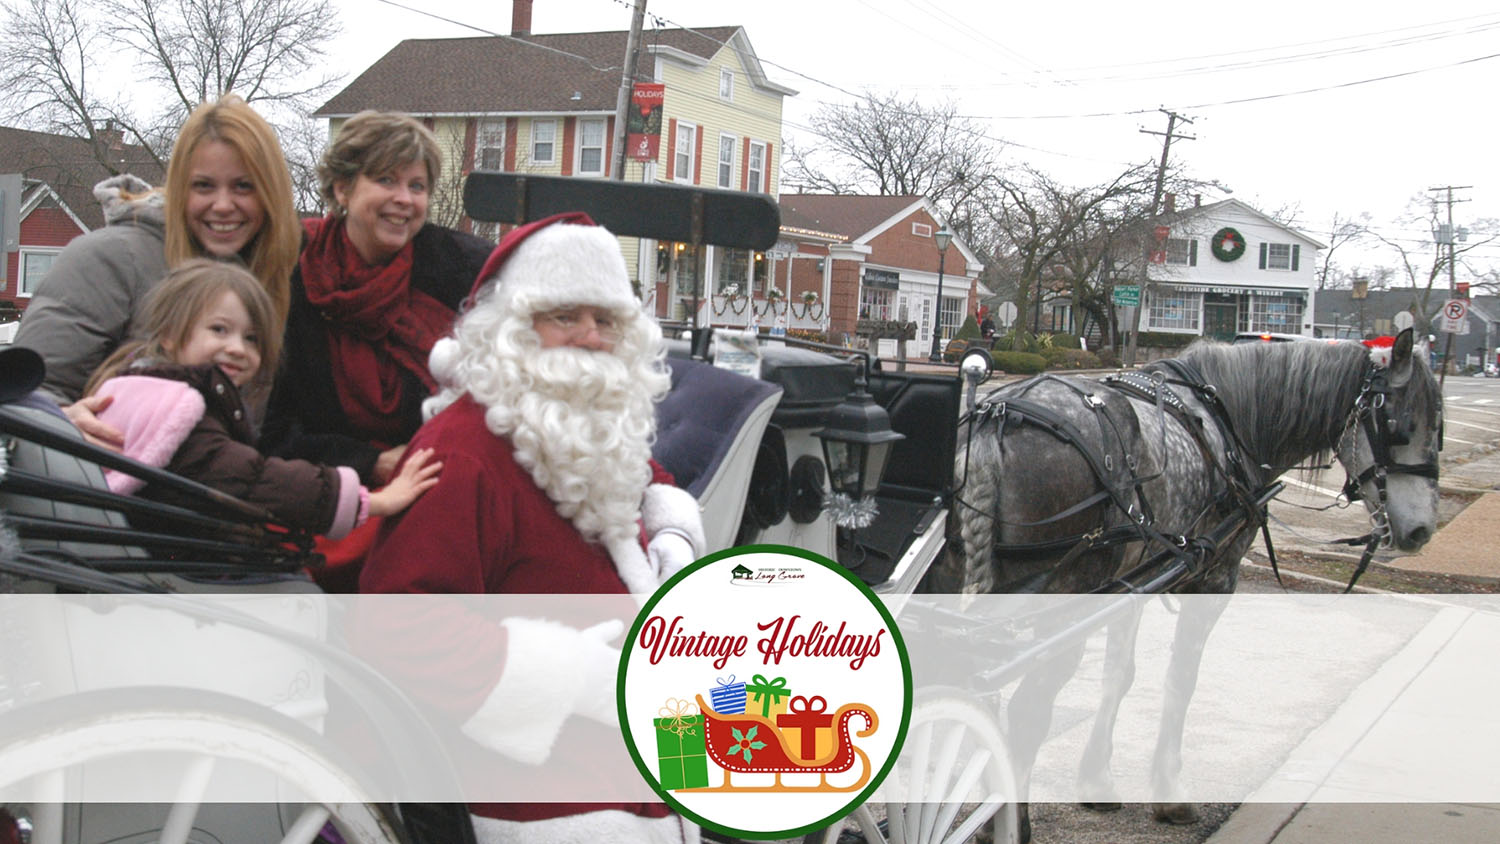 Vintage Holidays in Long Grove